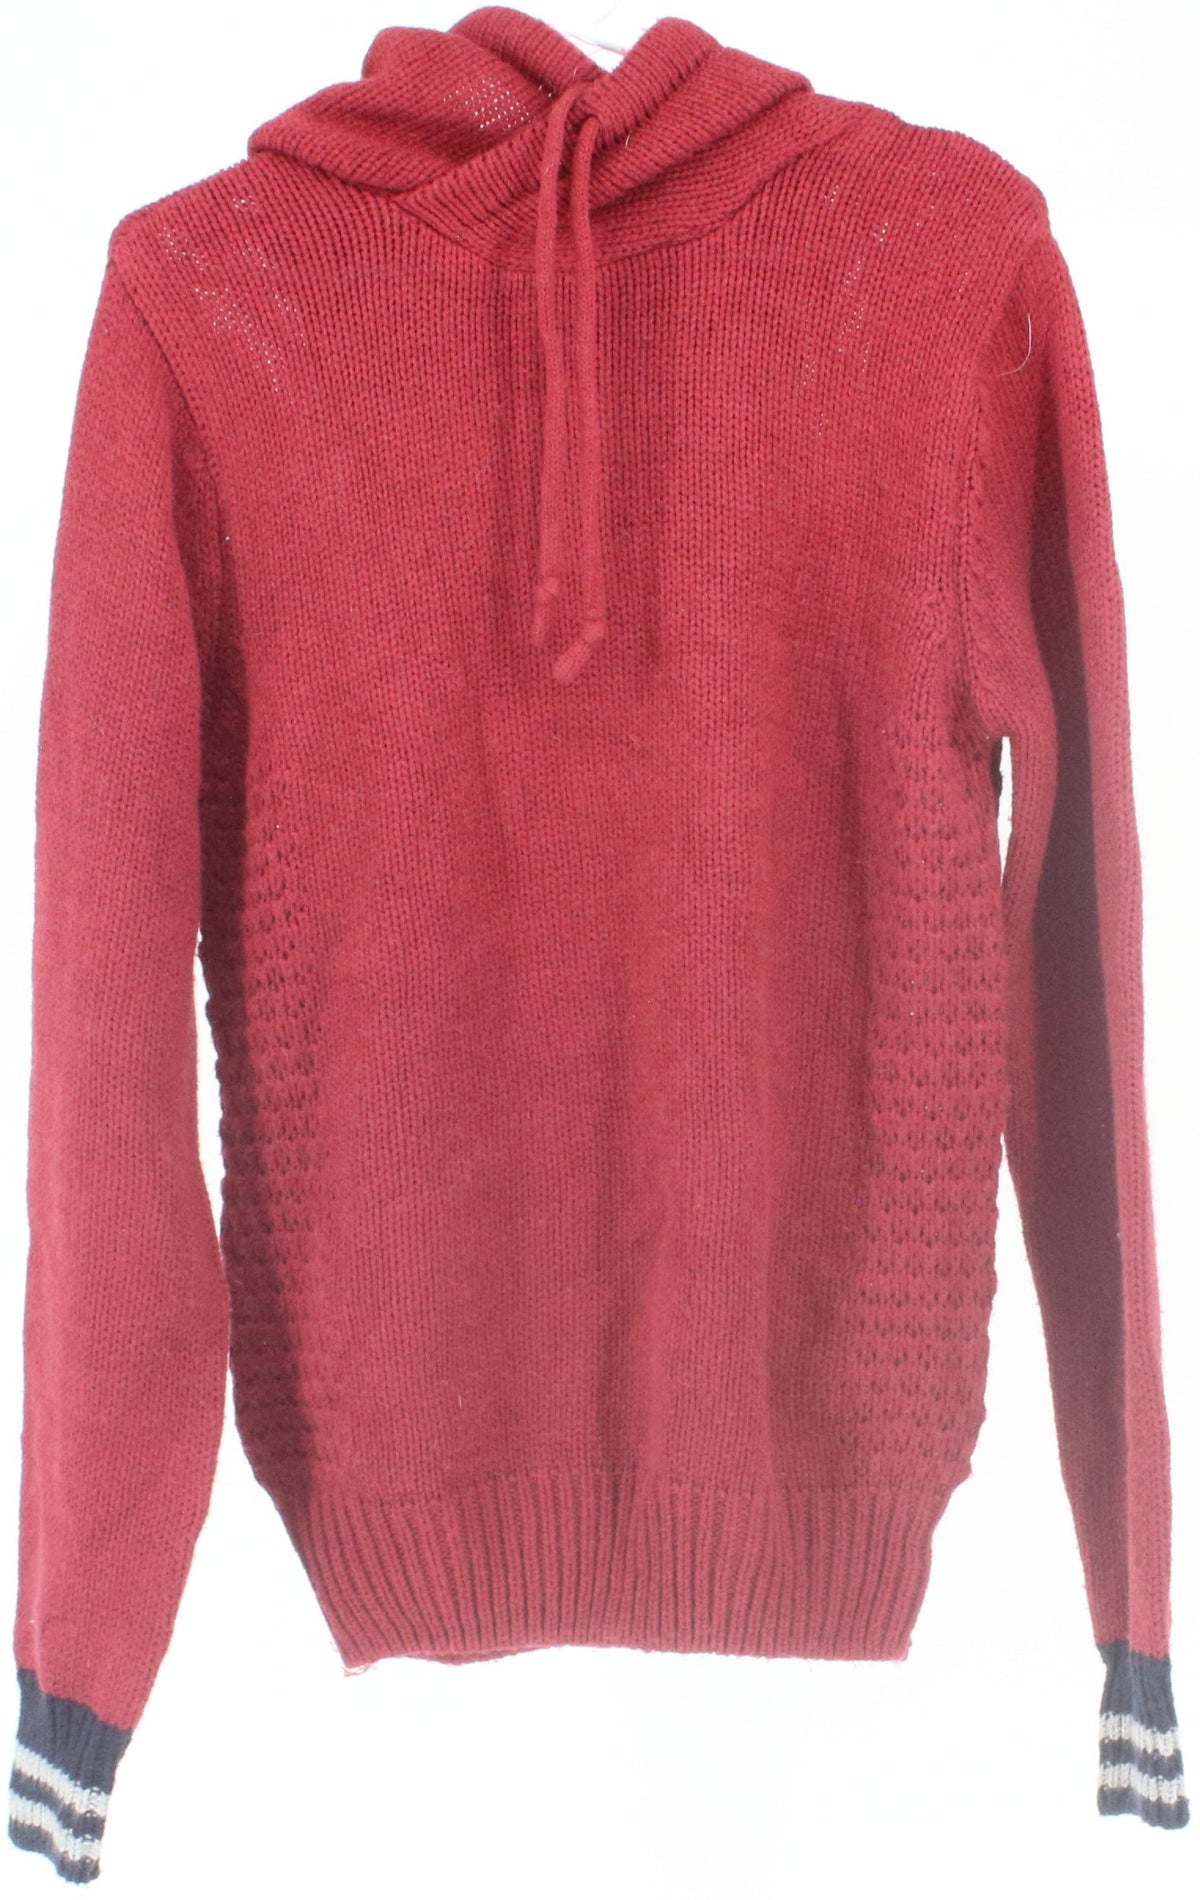 American Stitch Red Hooded Men's Sweater With Navy Blue Cuffs